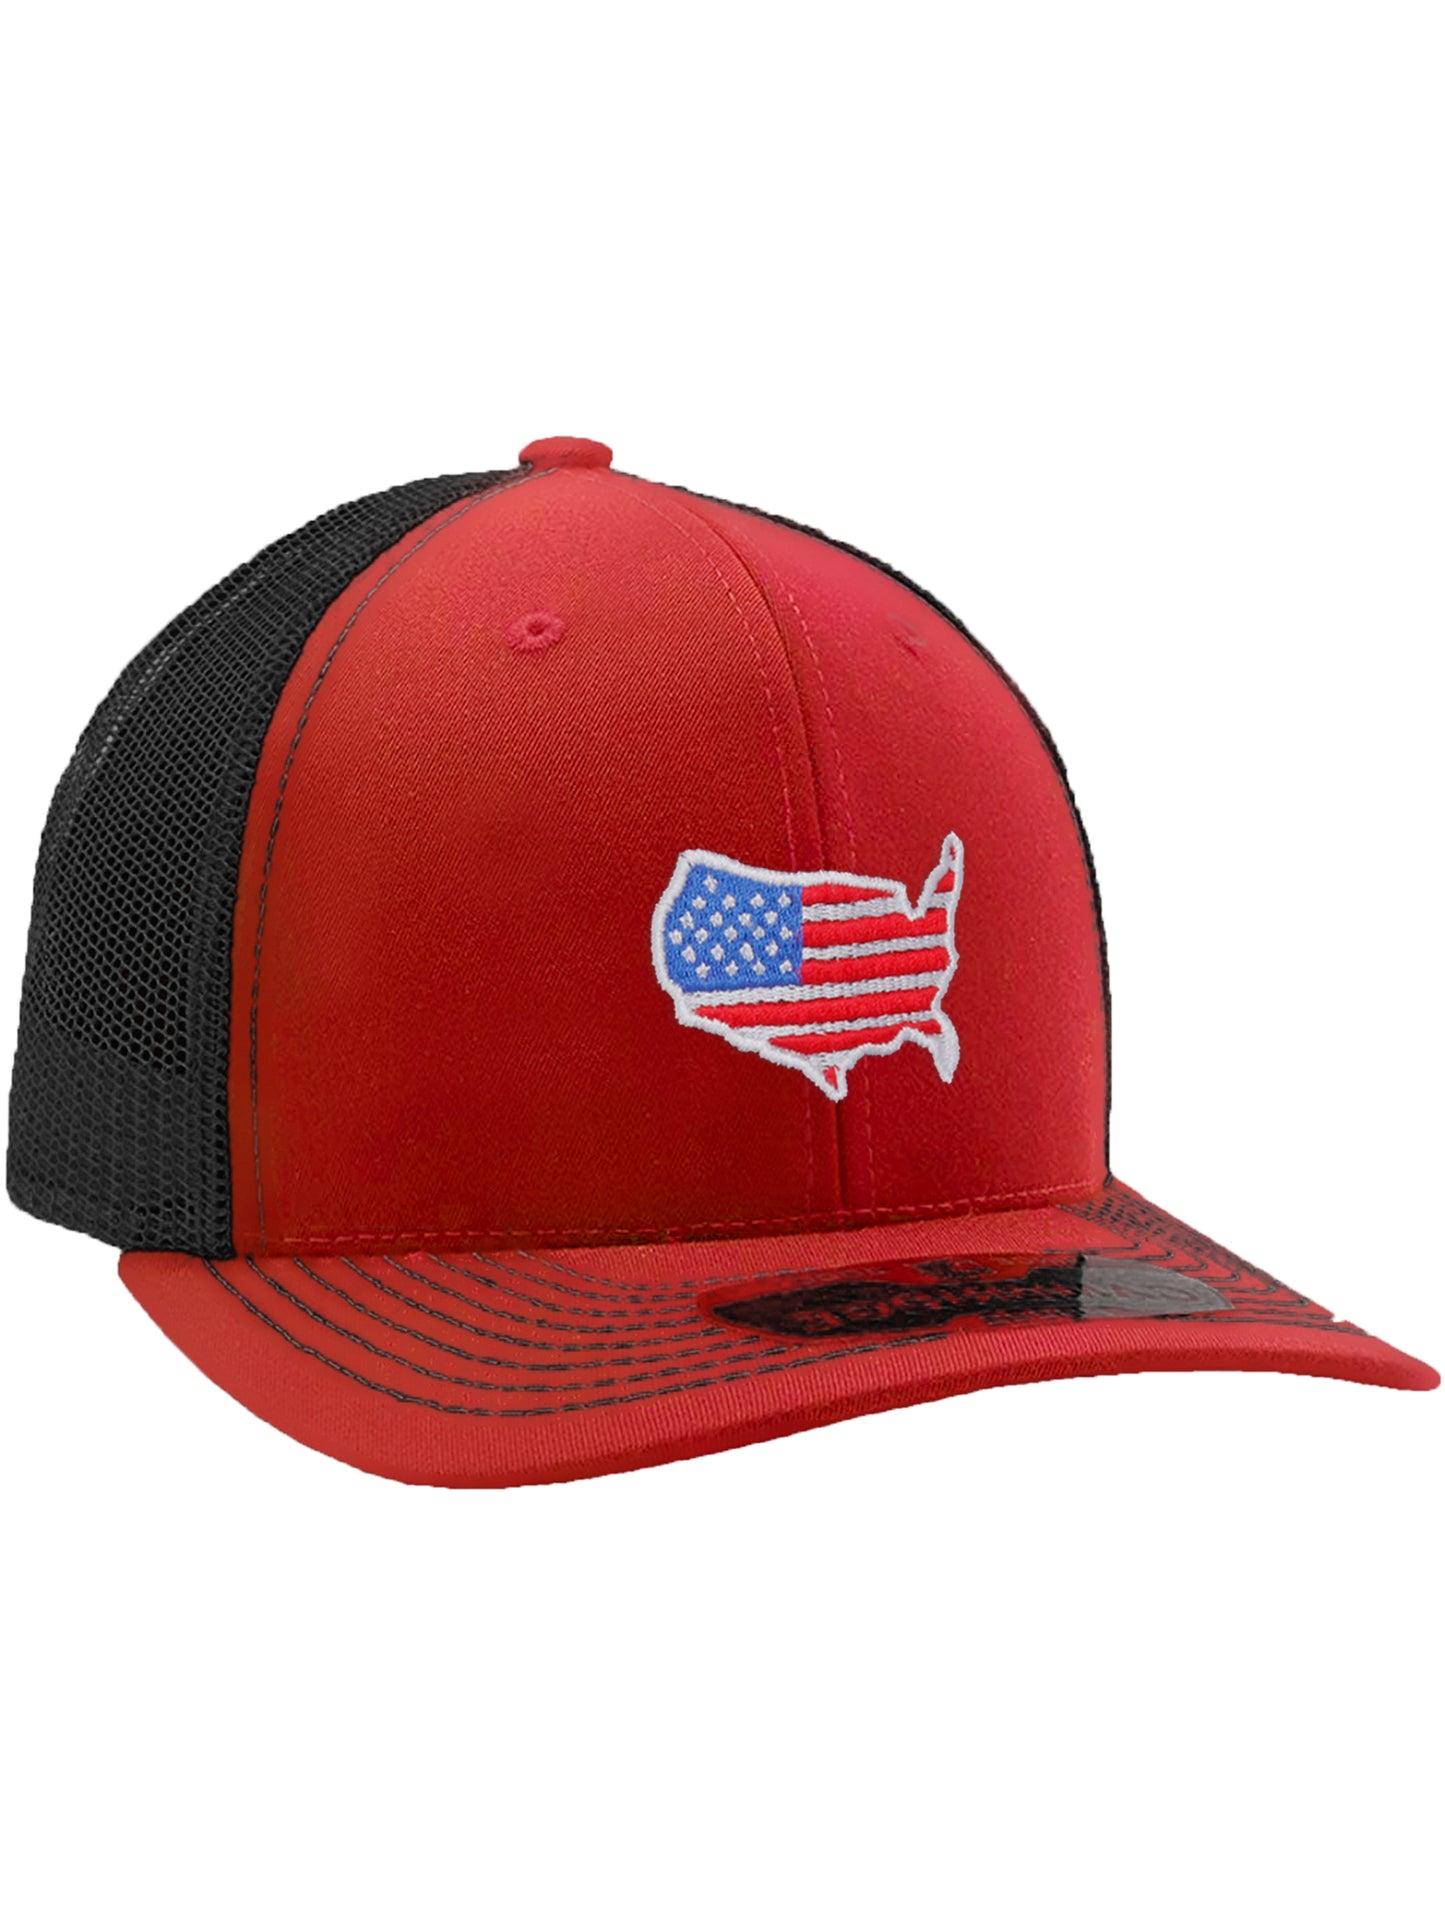 Daxton Classic Baseball Trucker Hat Embroidered USA Flag Structured Mid Profile Cap